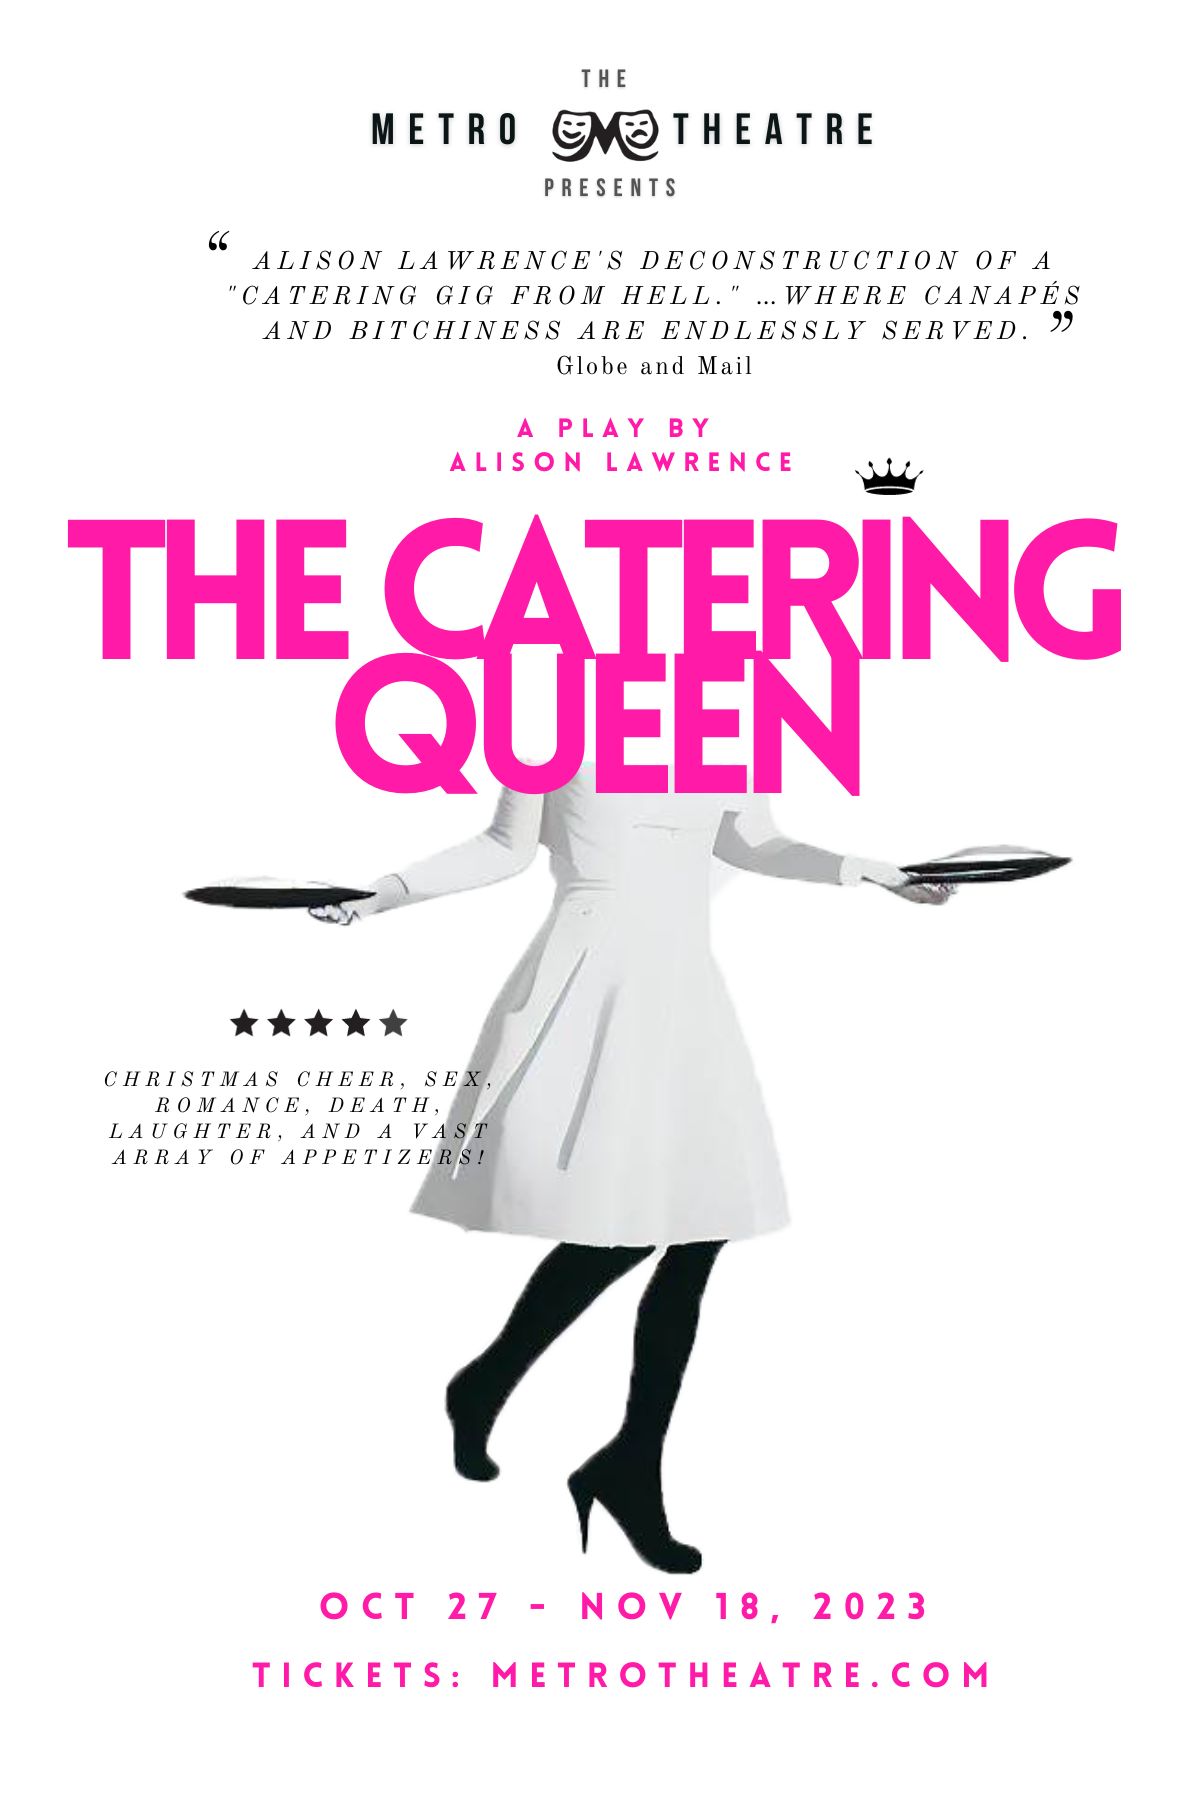 The Catering Queen by Alison Lawrence - image